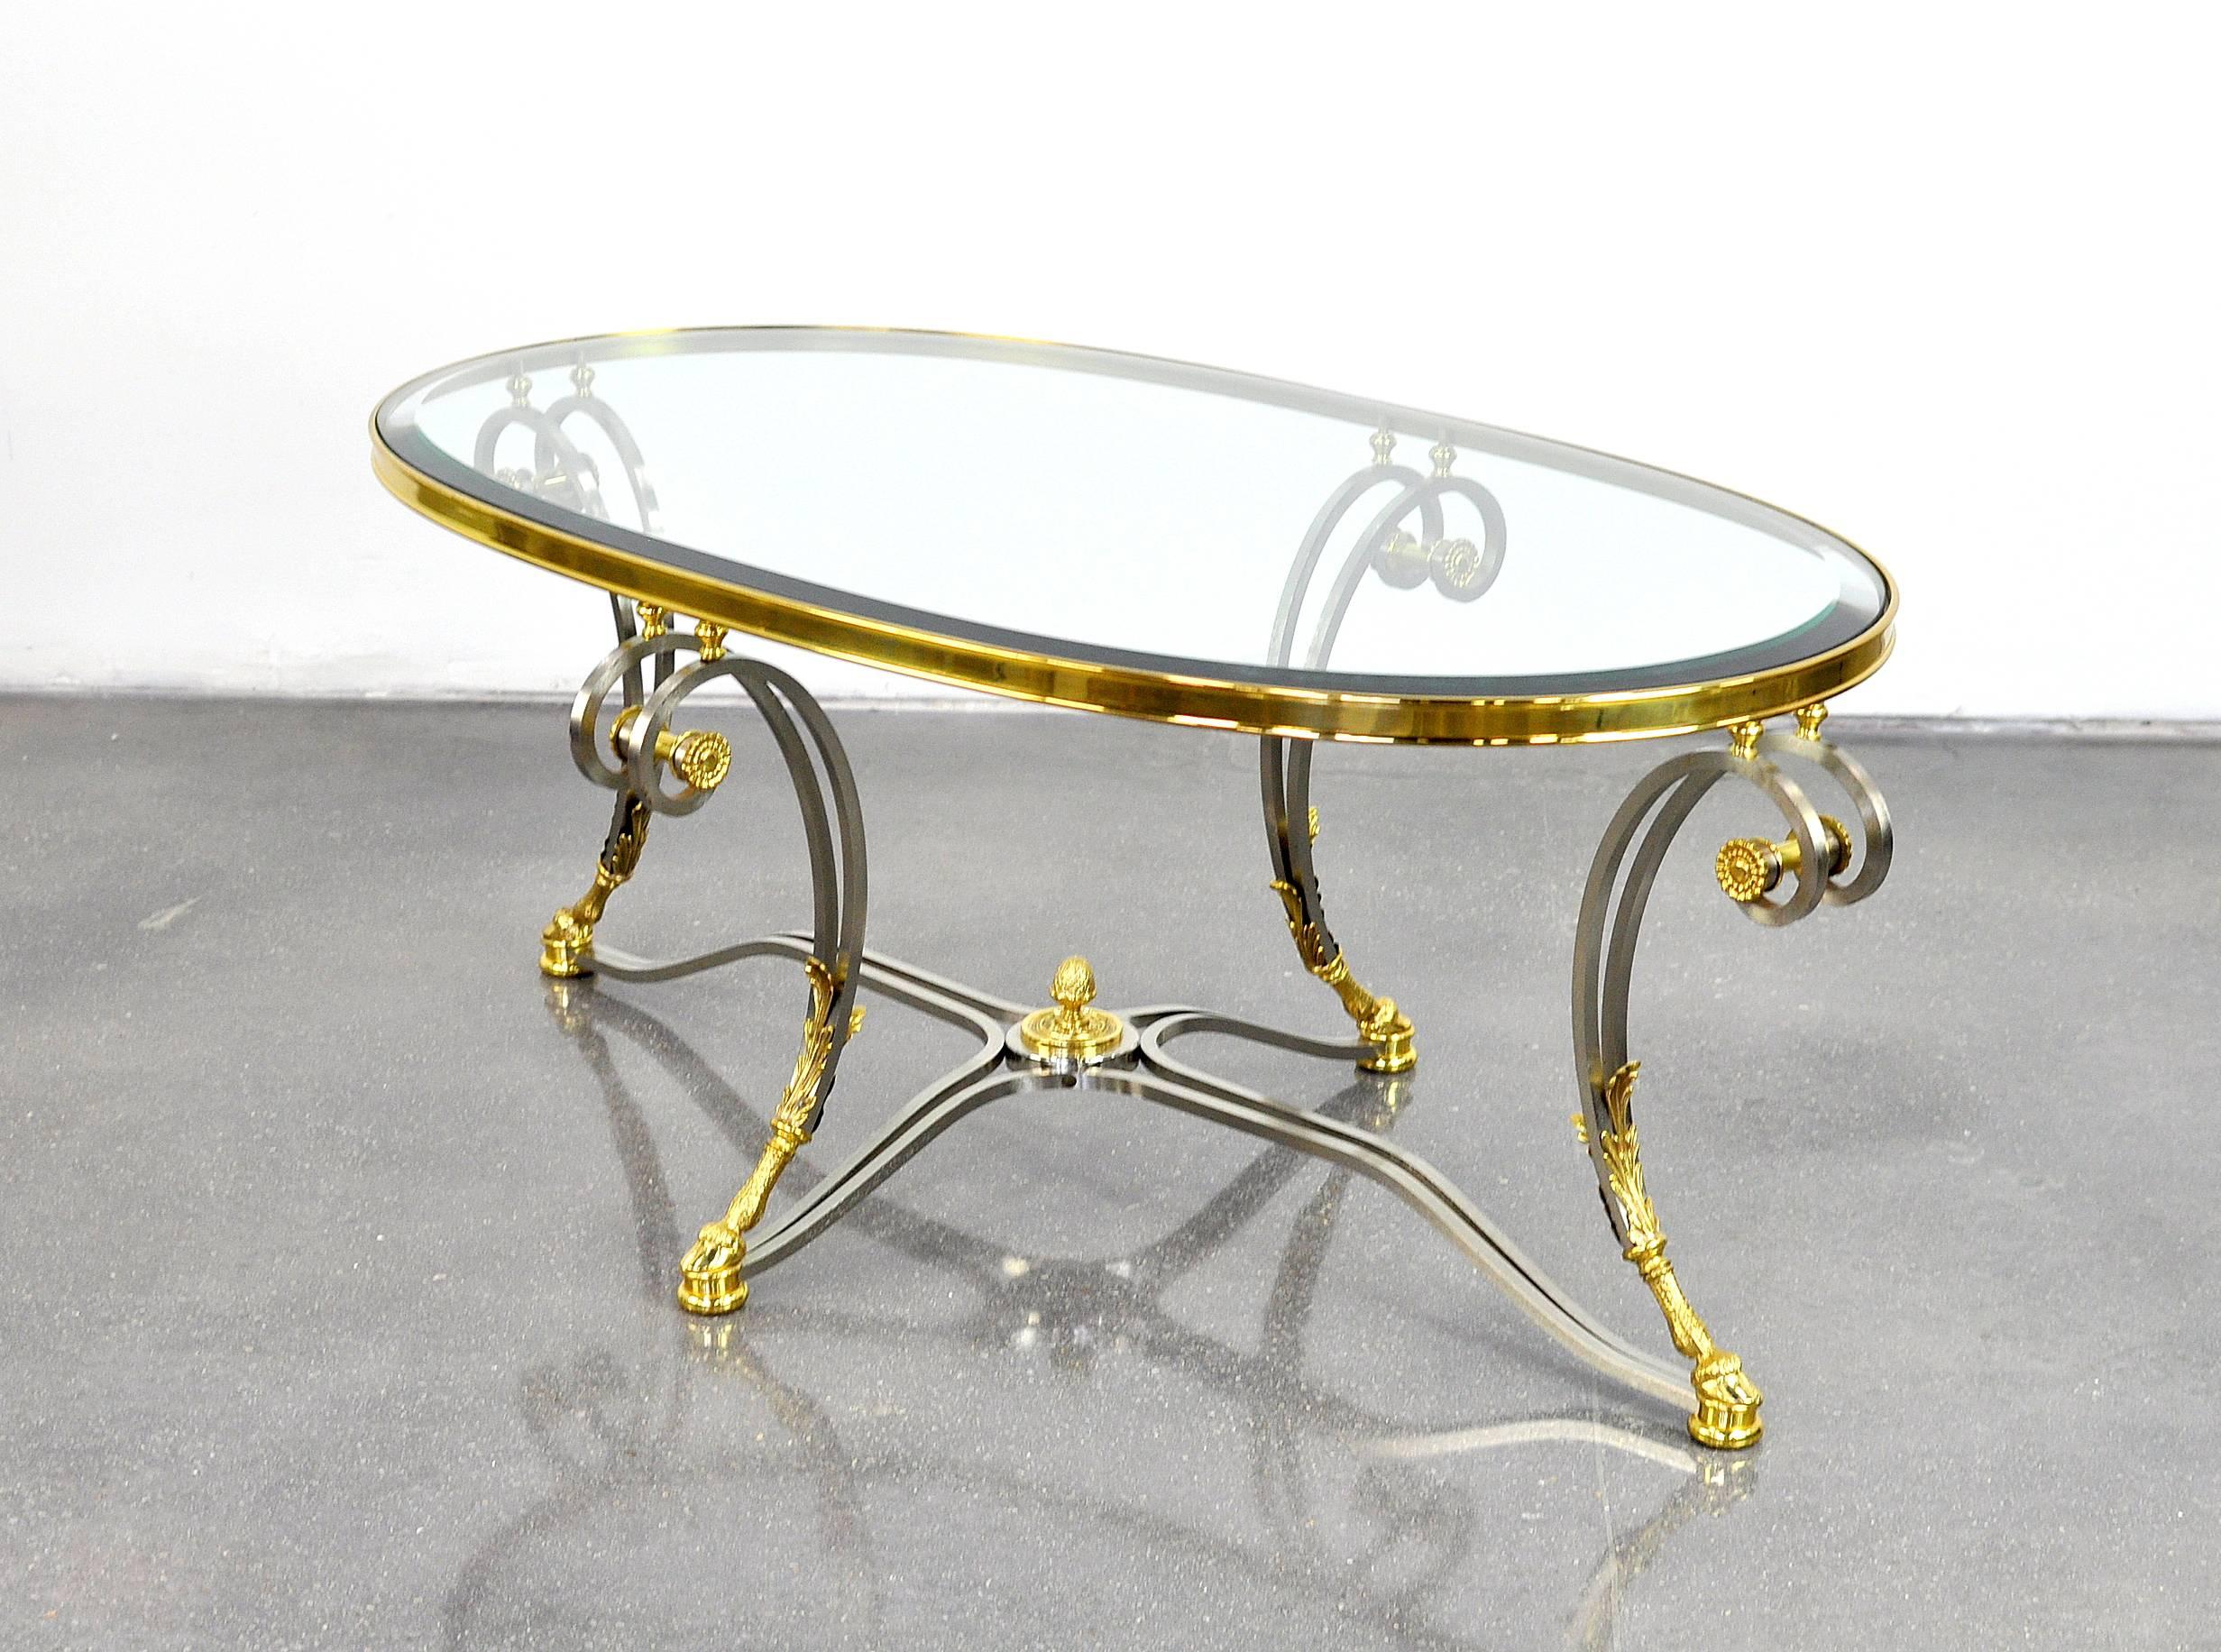 A gorgeous vintage La Barge model LT0390 Louis XVI cocktail table in polished steel and brass, with inset bevelled glass top. The oval table features ram's feet, pine cone finial, rosettes and scrollwork, in typical neoclassical fashion. A wonderful